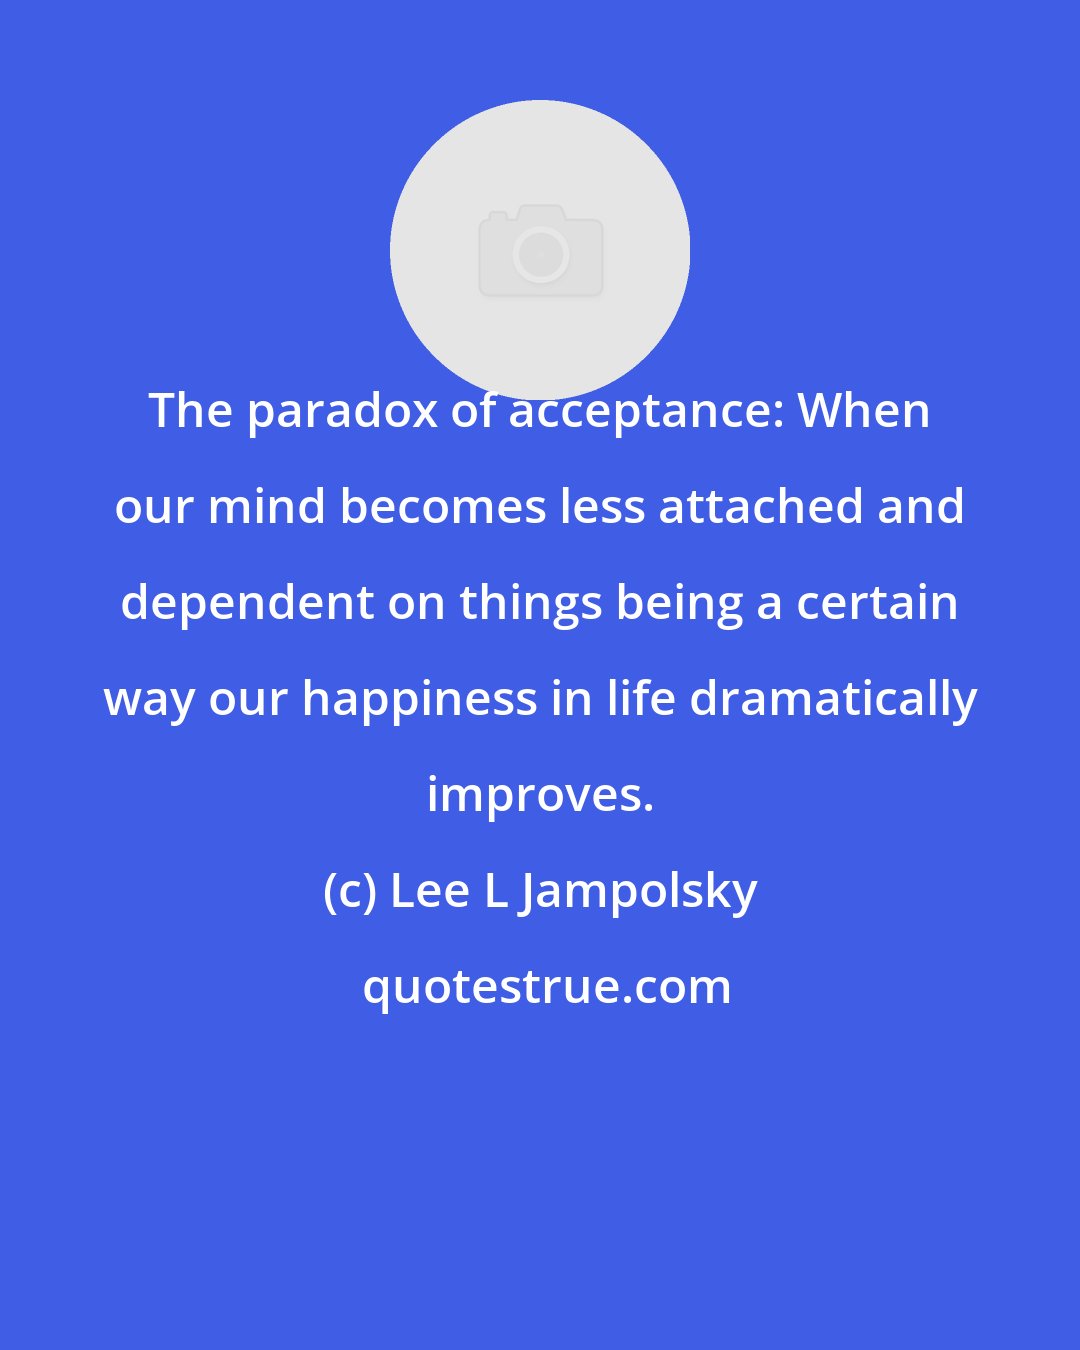 Lee L Jampolsky: The paradox of acceptance: When our mind becomes less attached and dependent on things being a certain way our happiness in life dramatically improves.